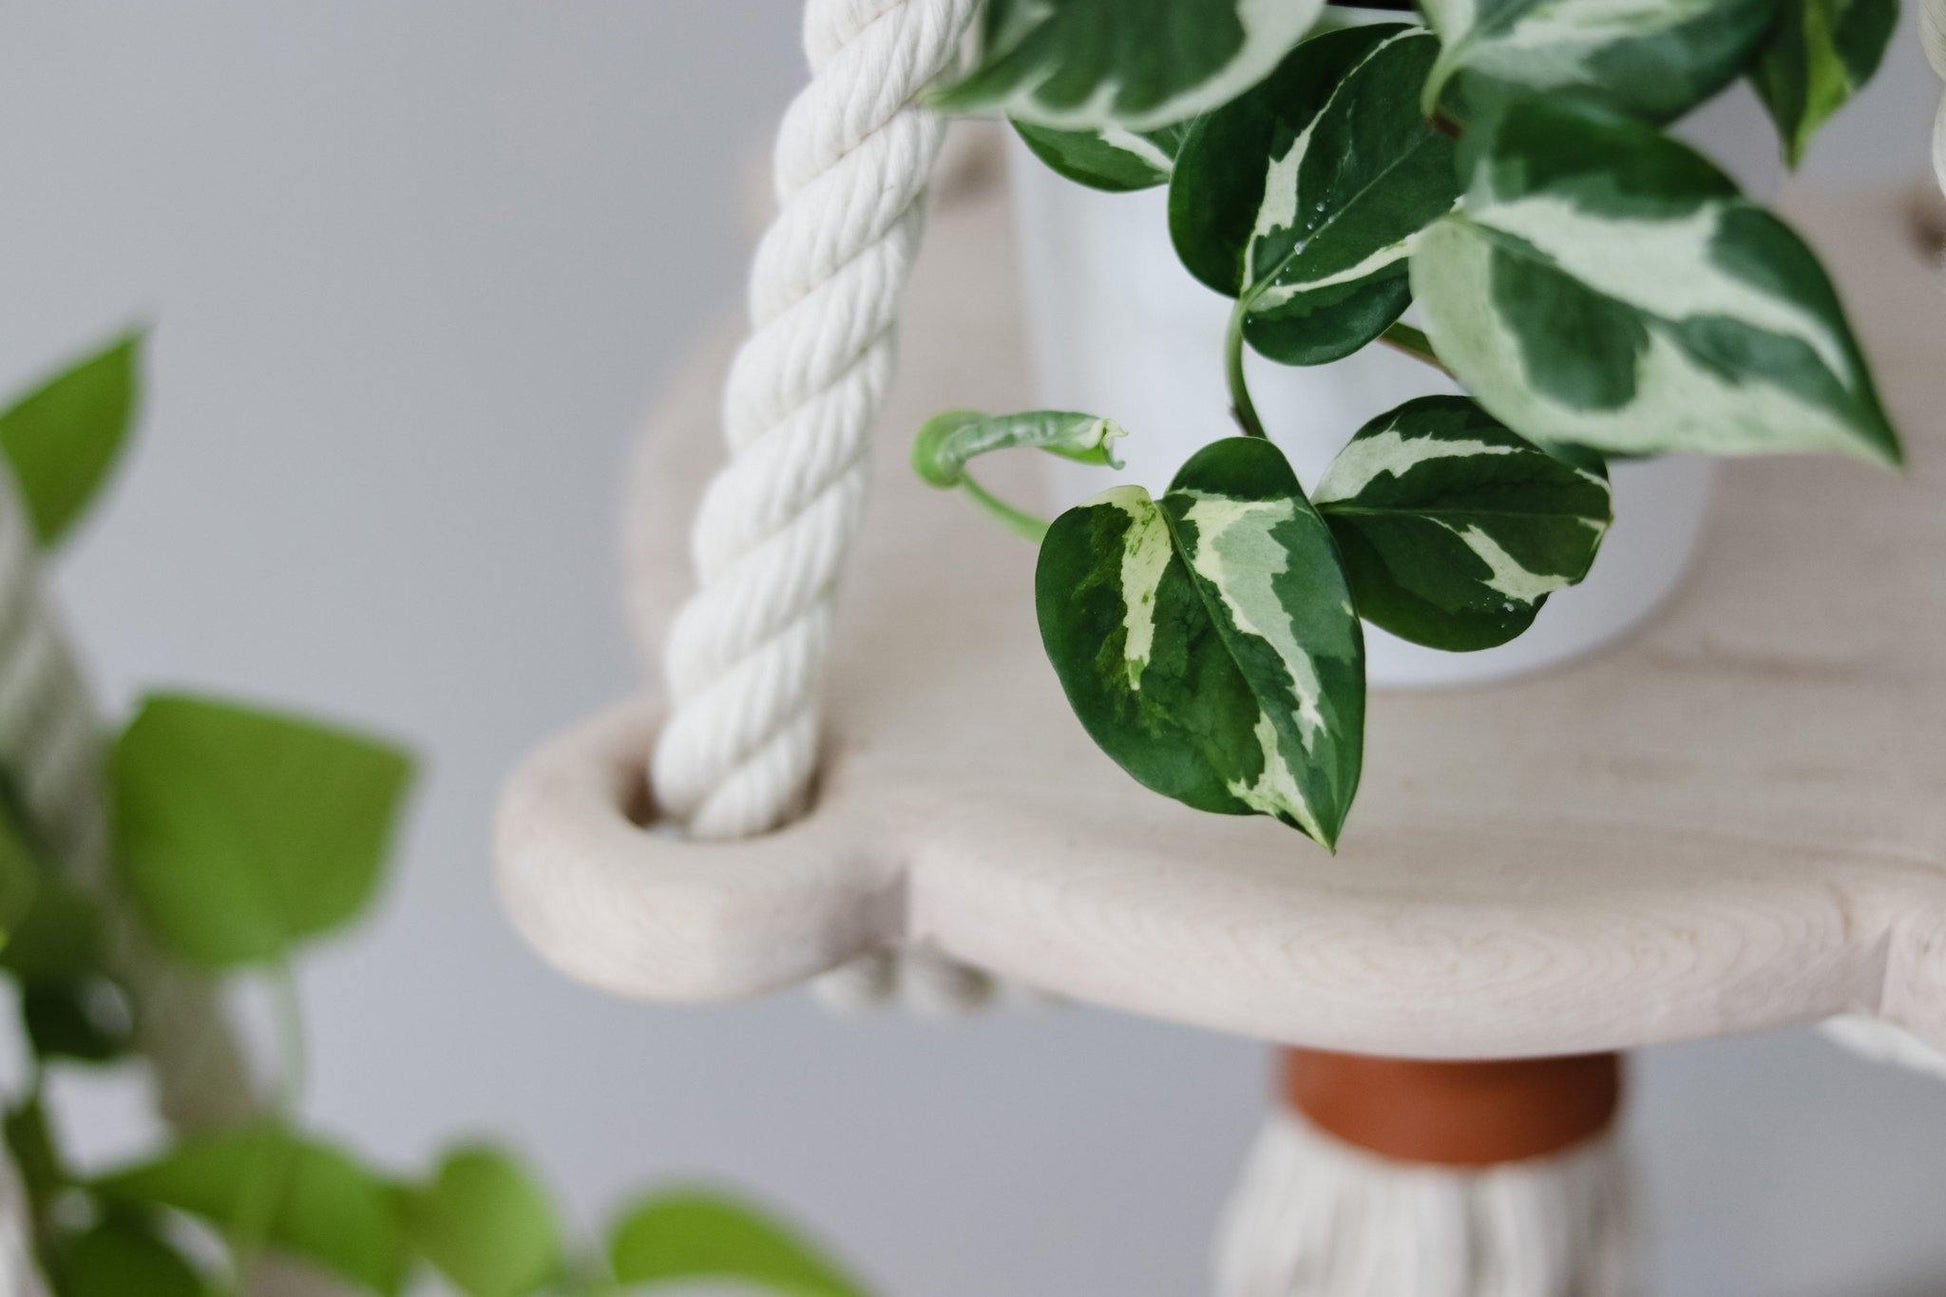 Wood, rope and leather hanging planter